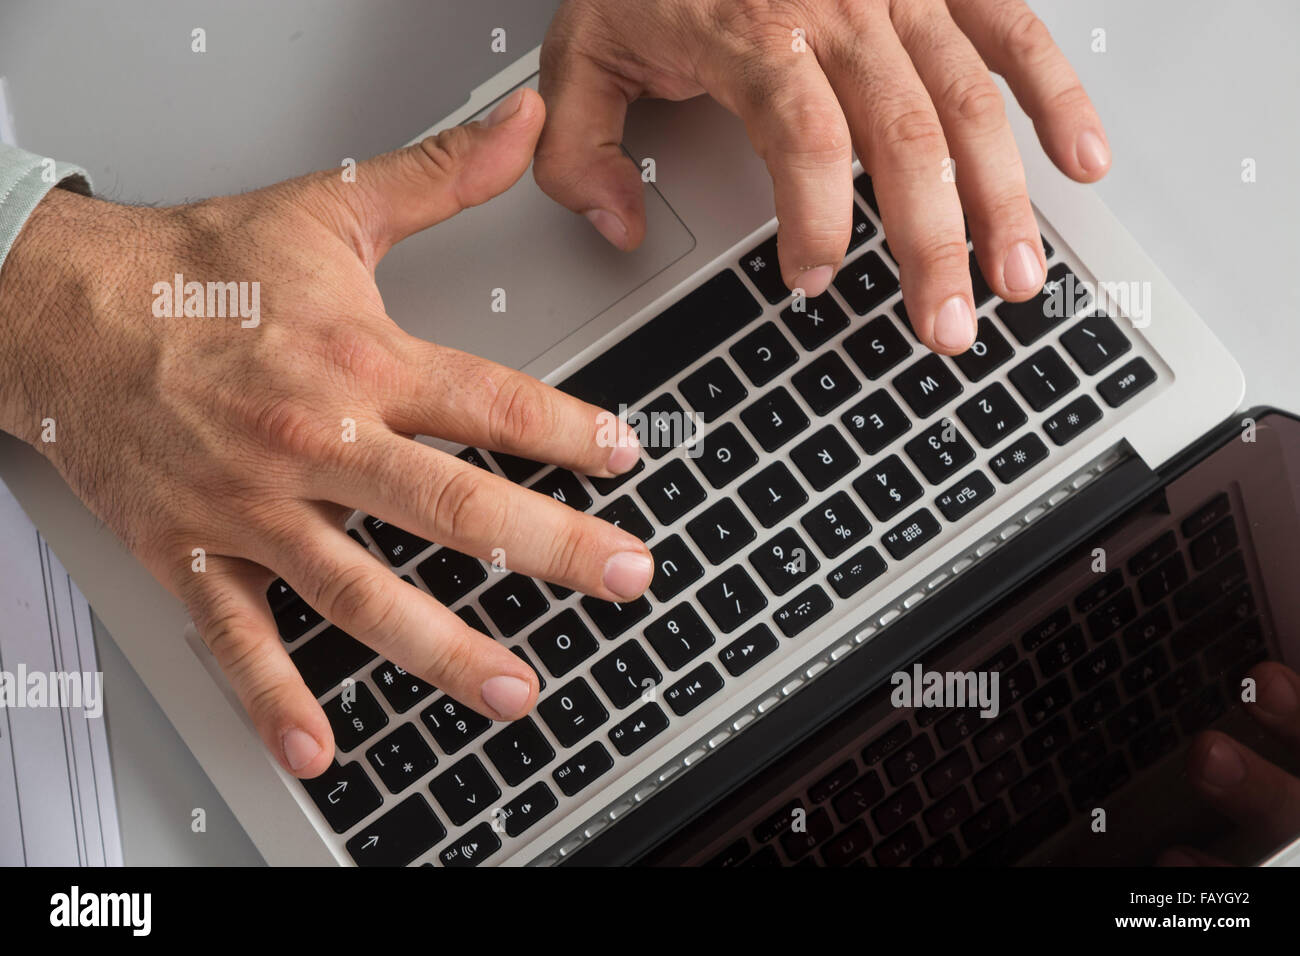 Fingers typing on a keyboard Stock Photo